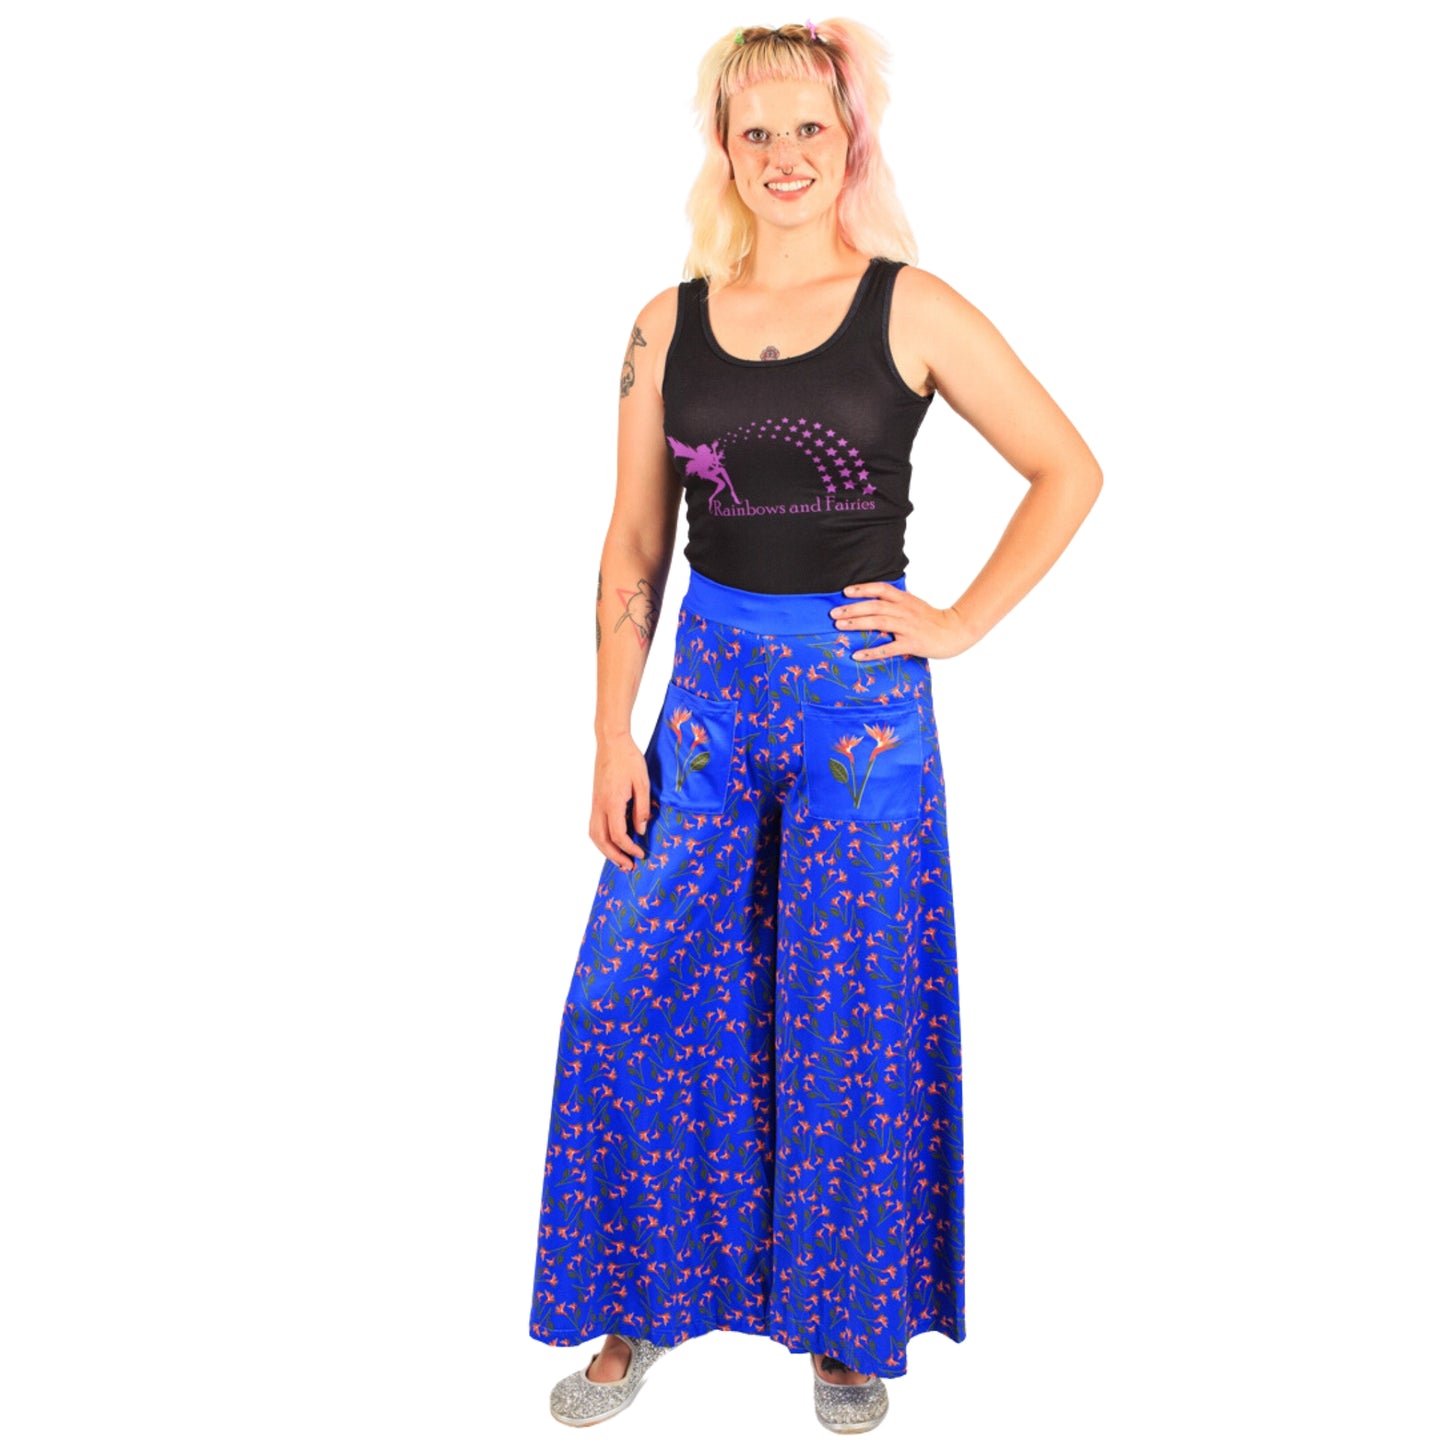 Birds Of Paradise Wide Leg Pants by RainbowsAndFairies.com.au (Flowers - Floral Print - Vintage Inspired - Flares - Pants With Pockets) - SKU: CL_WIDEL_BPARA_ORG - Pic-05